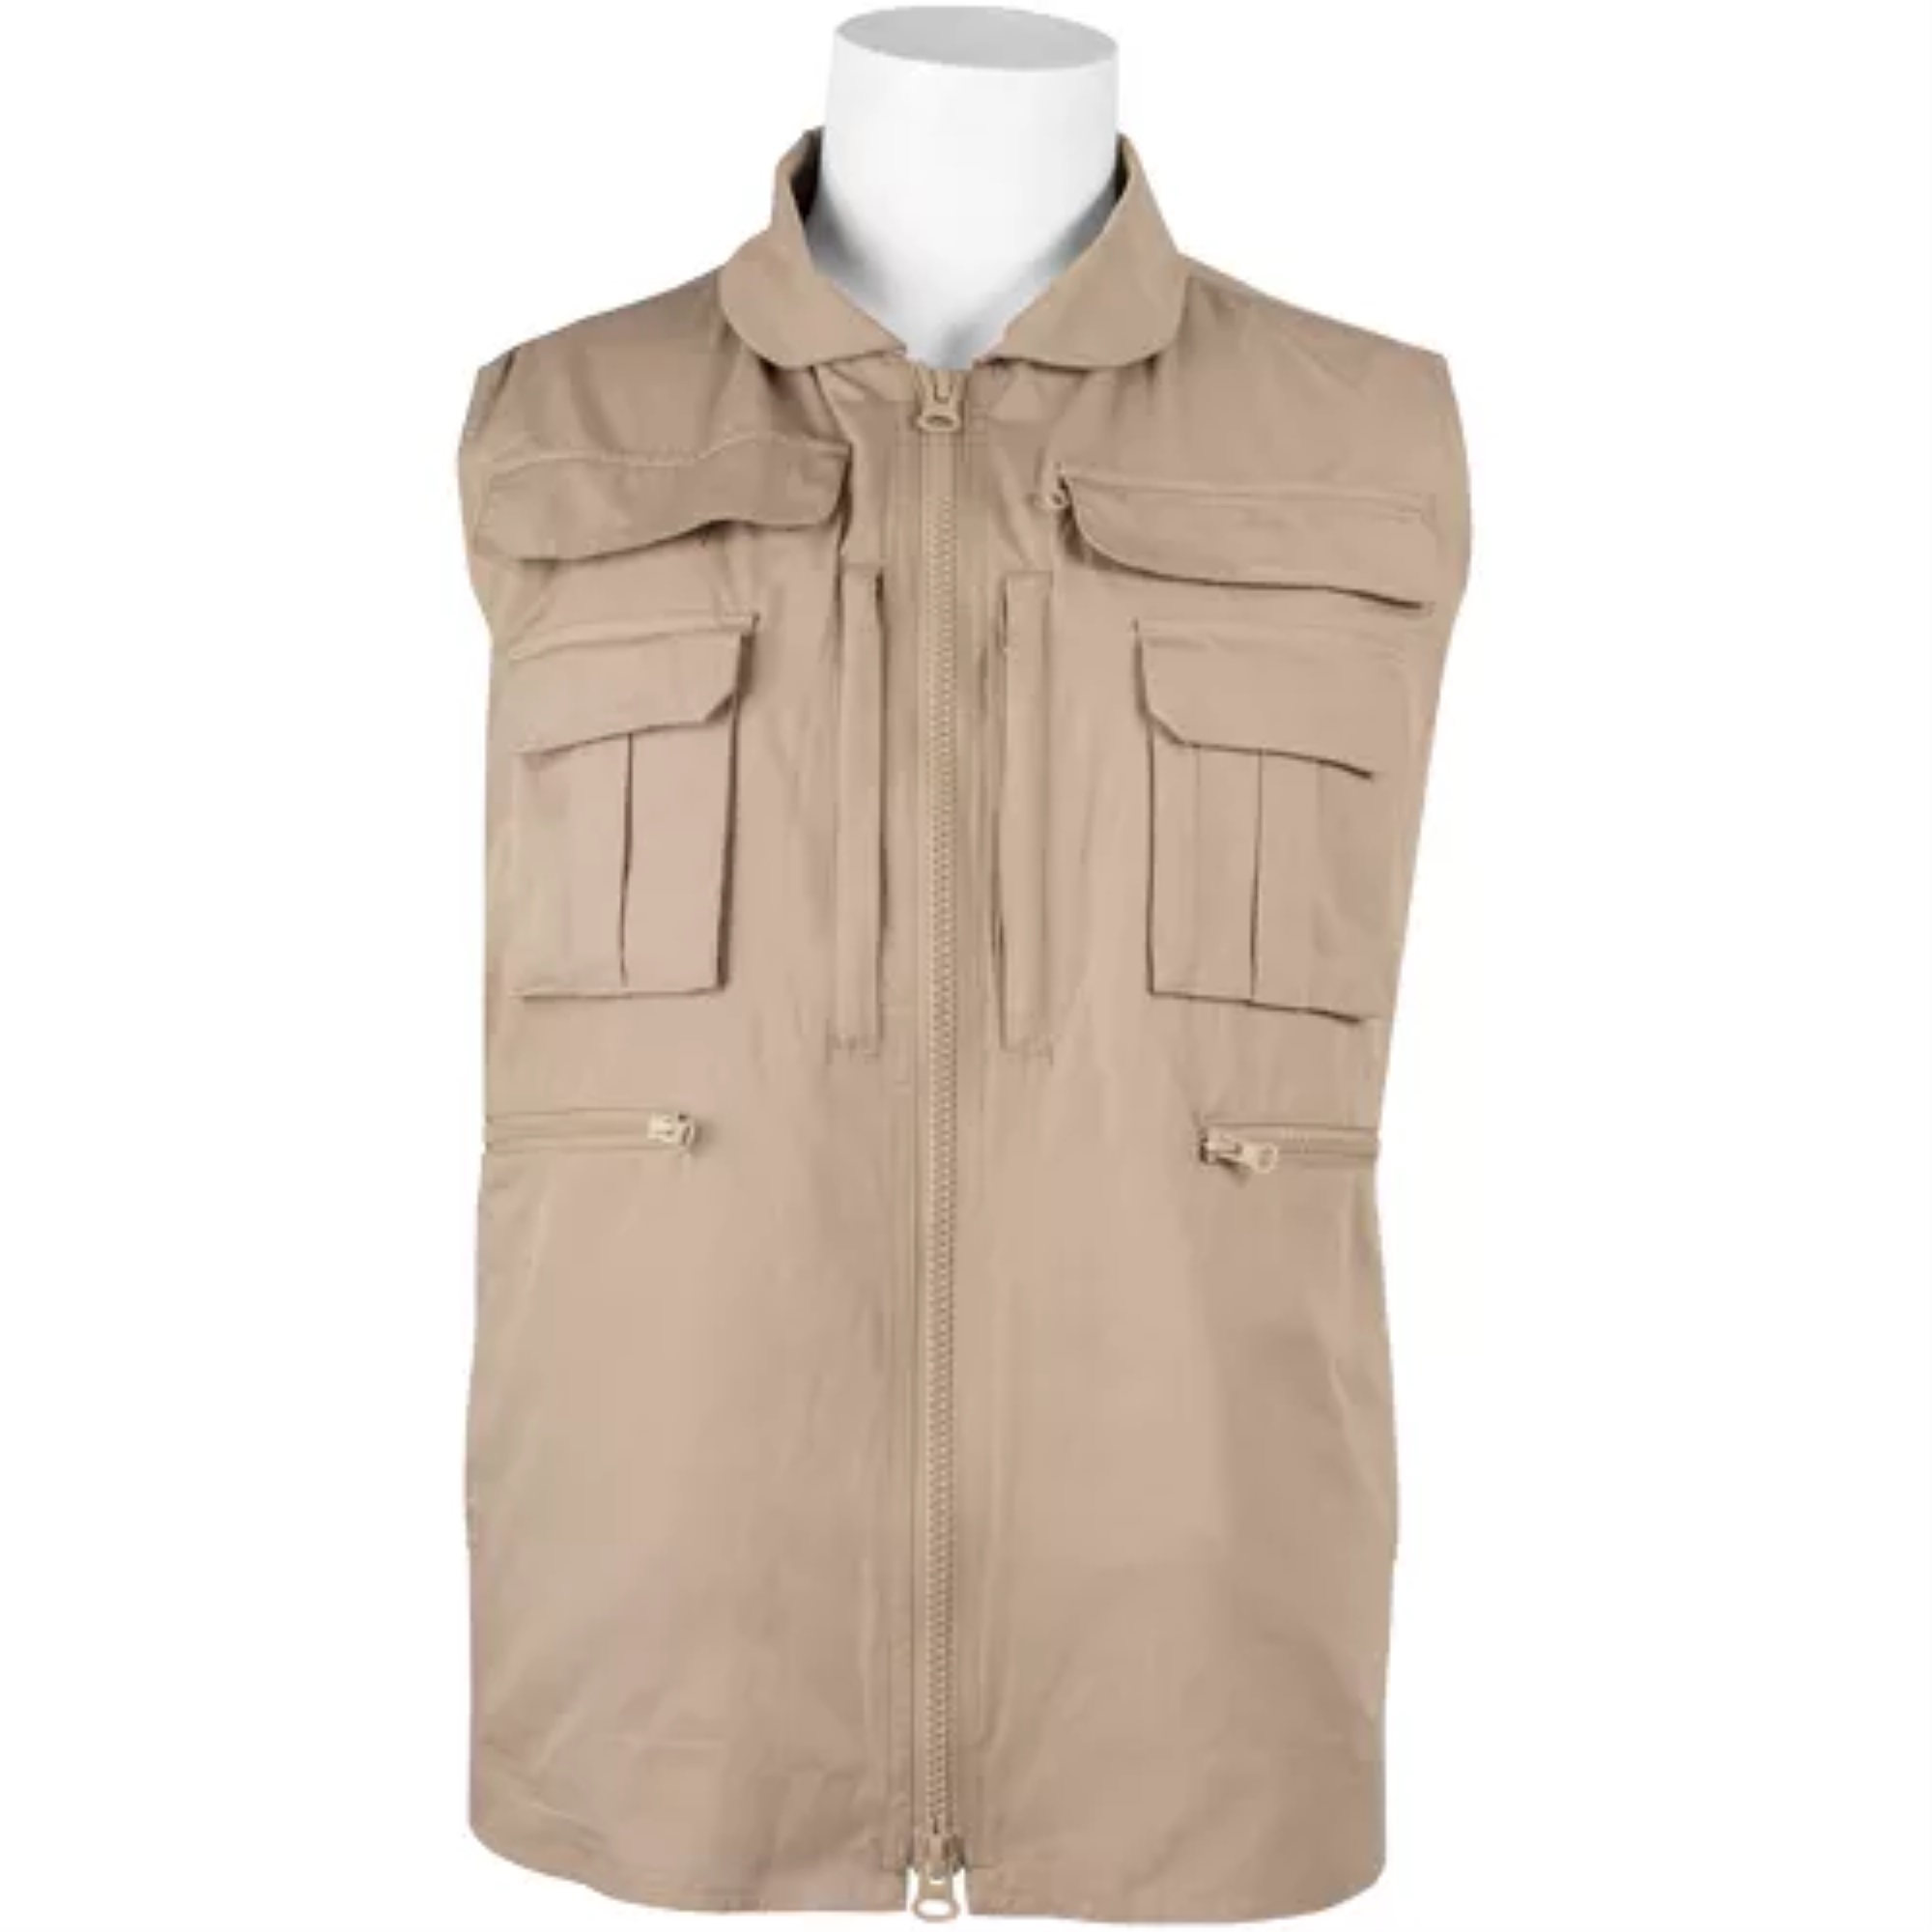 Fox Outdoor Products Viper Concealed Carry Vest Khaki - Small